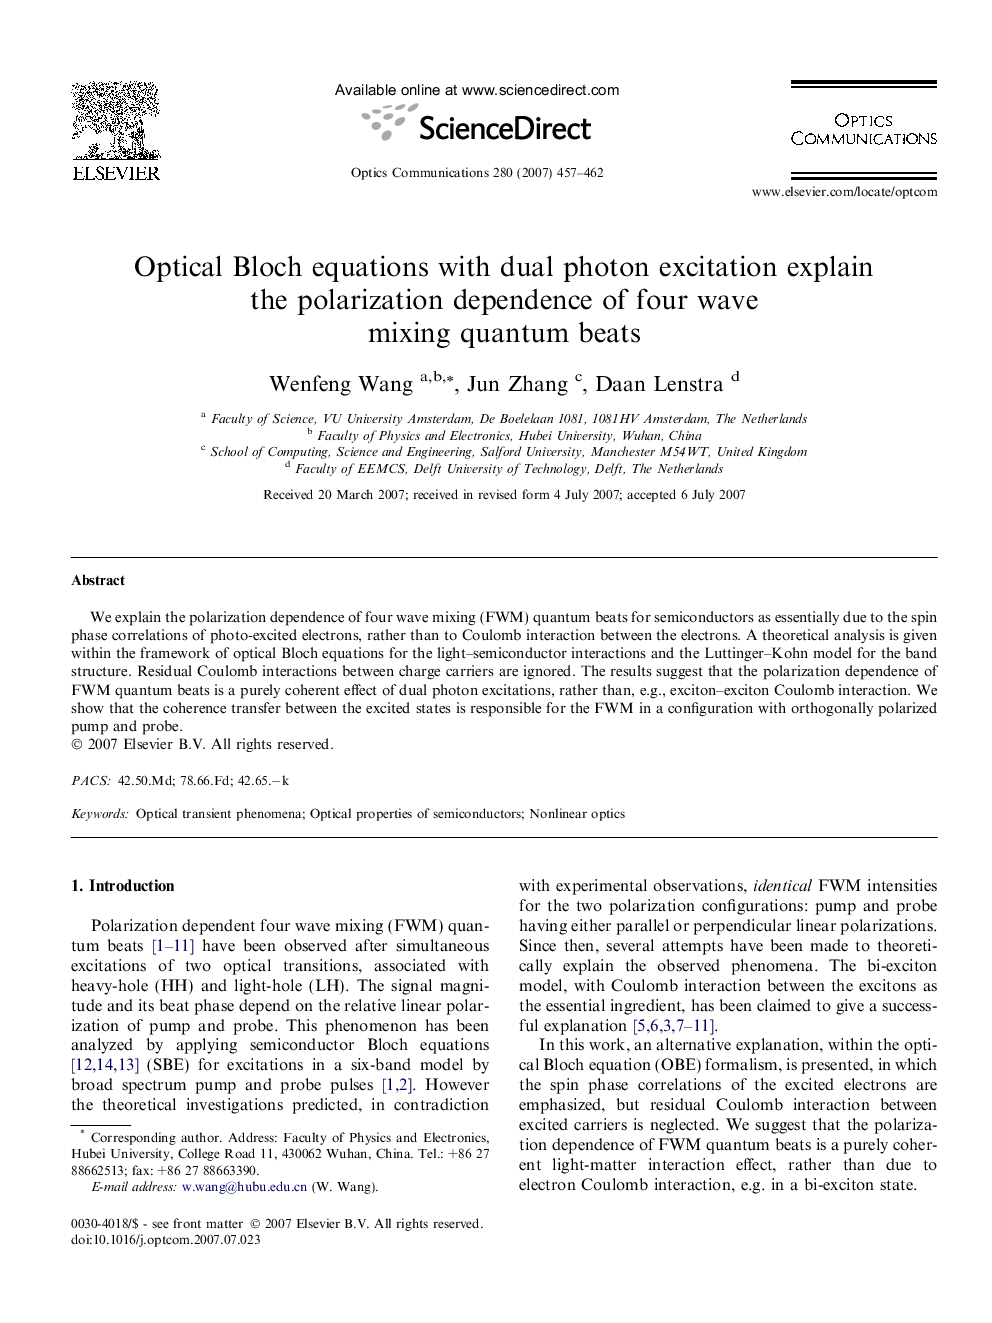 Optical Bloch equations with dual photon excitation explain the polarization dependence of four wave mixing quantum beats